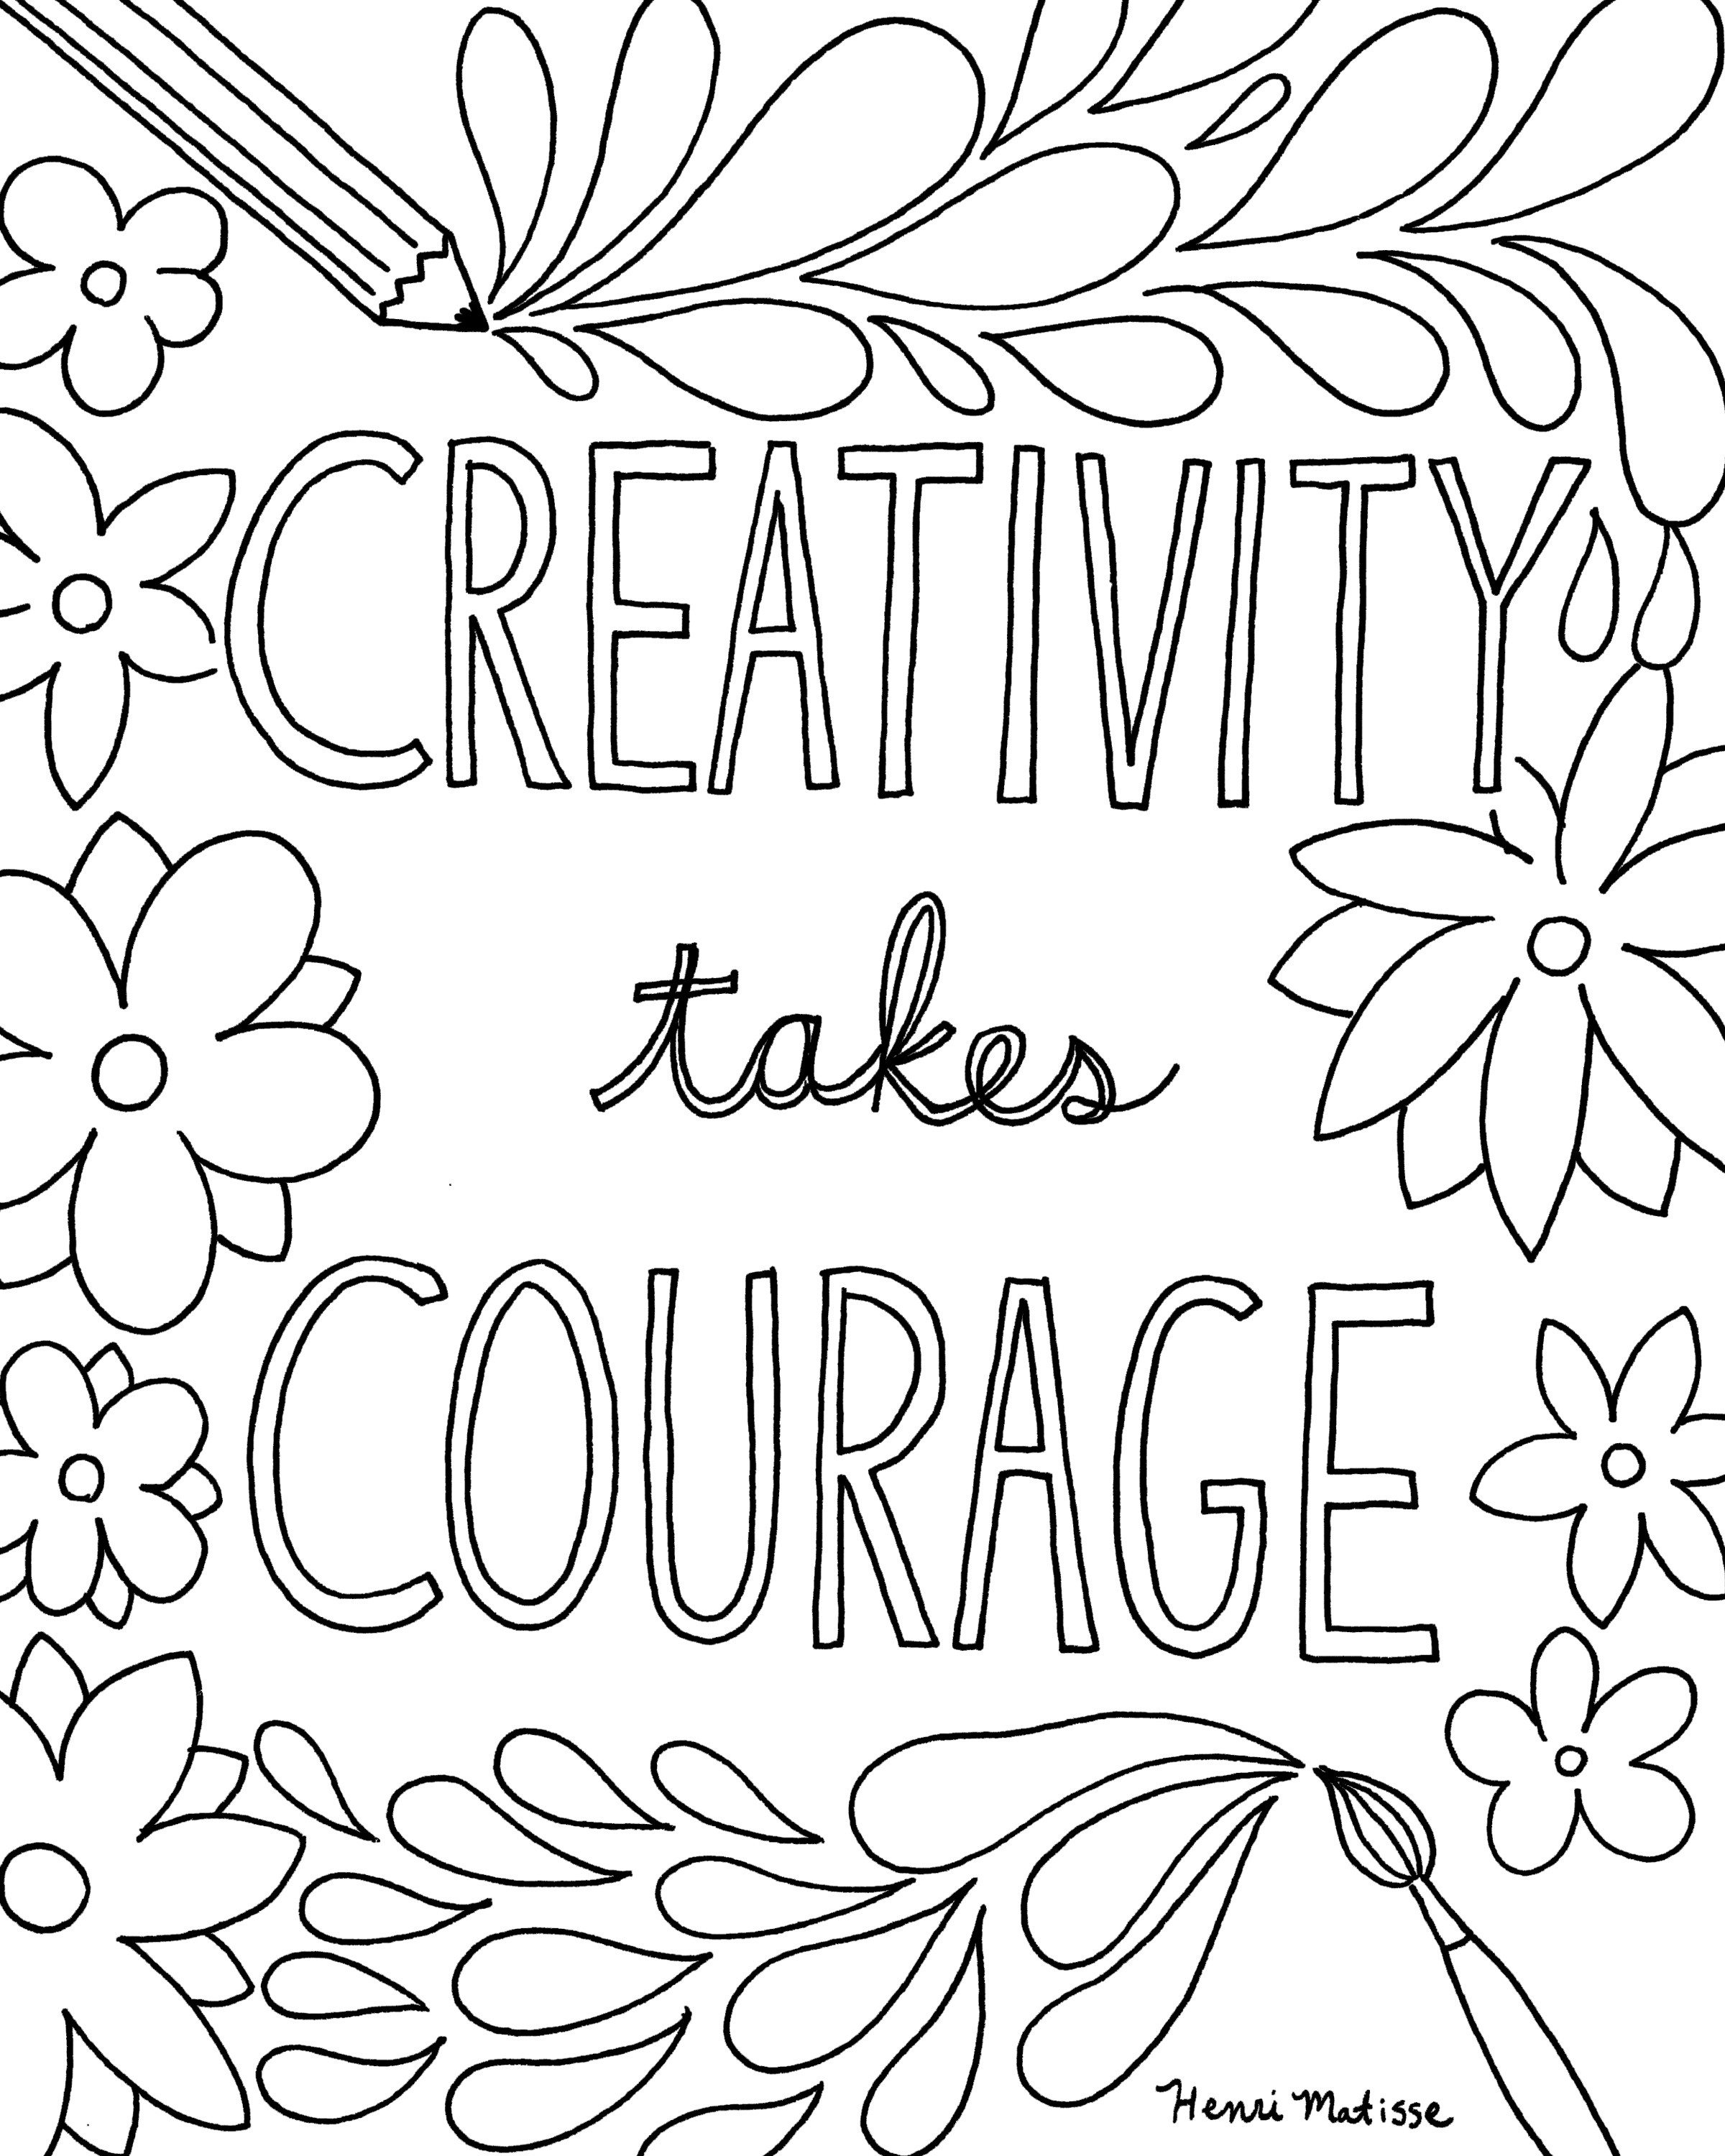 Coloring Pages For Kids That You Can Color Online
 Free Printable Quote Coloring Pages for Grown Ups